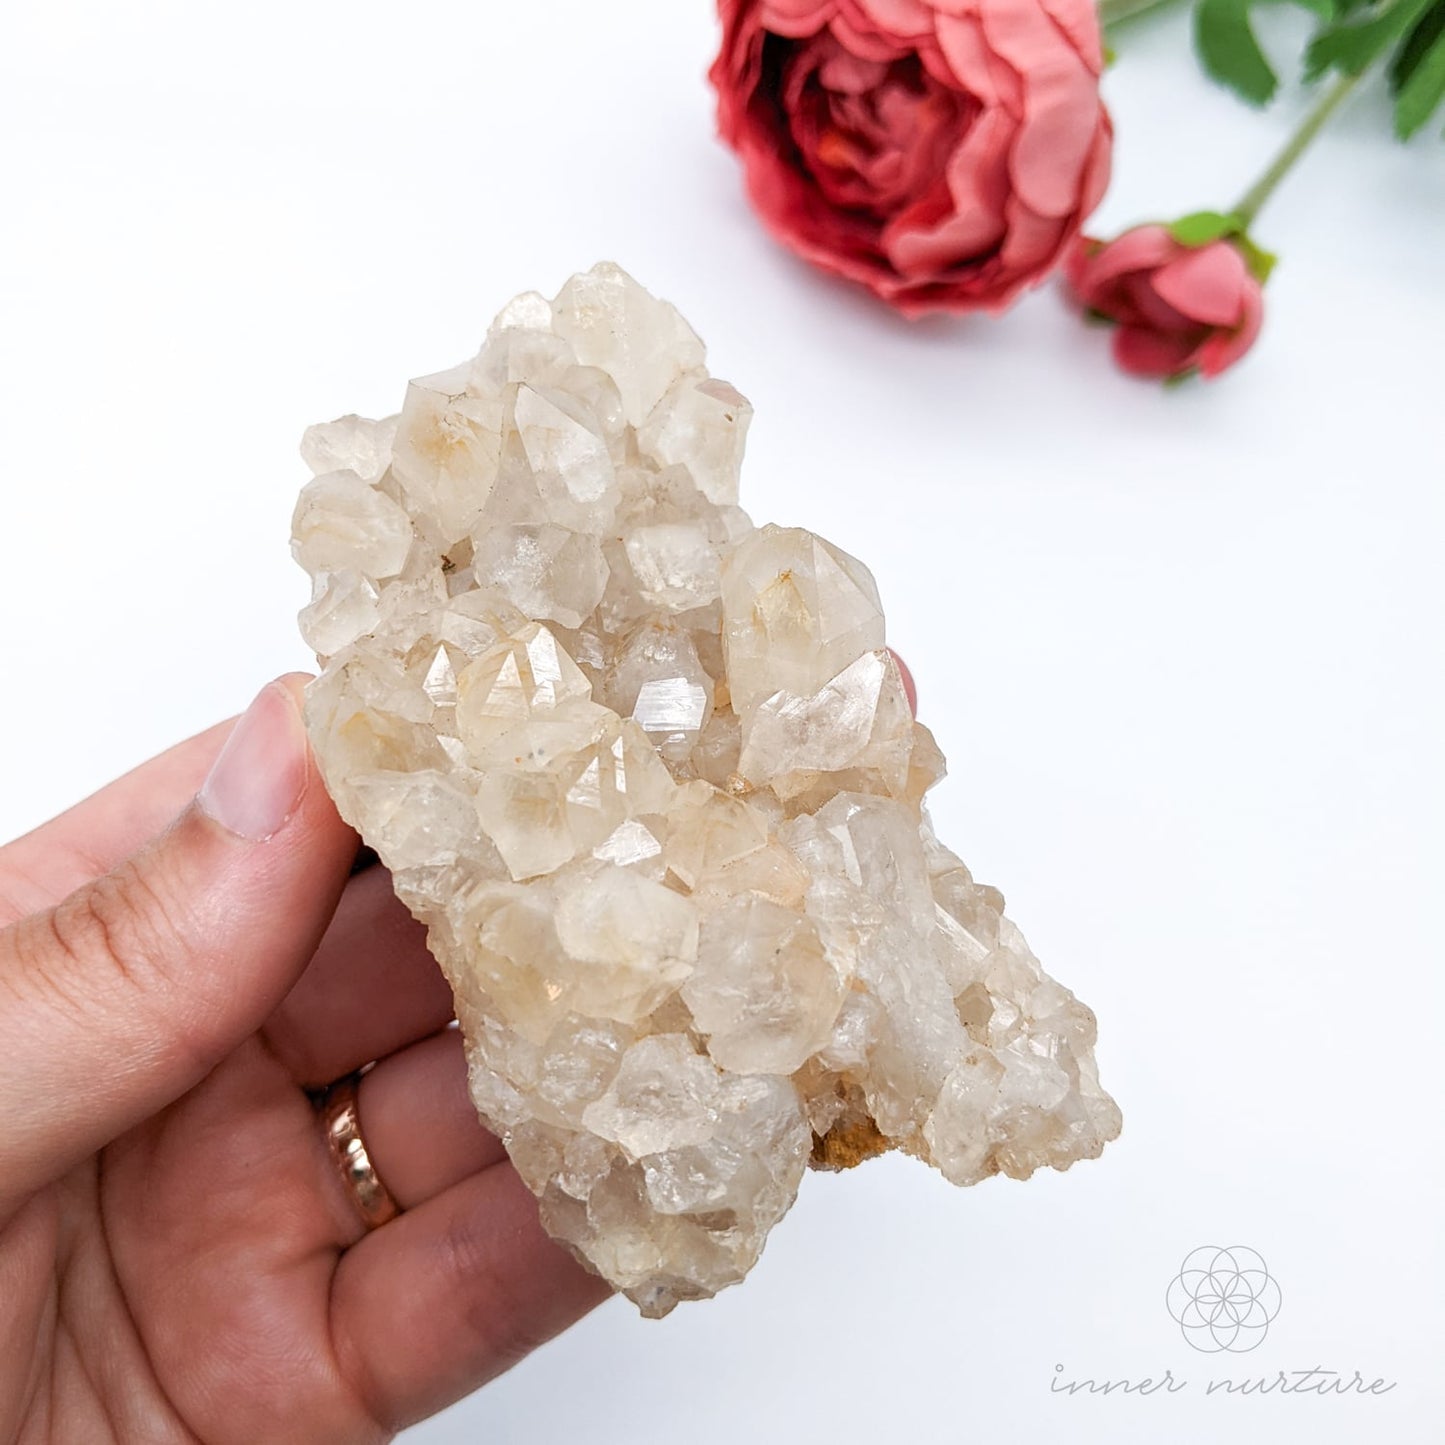 Clear Quartz Cluster With Inclusions - #7 | Crystal Shop Australia - Inner Nurture